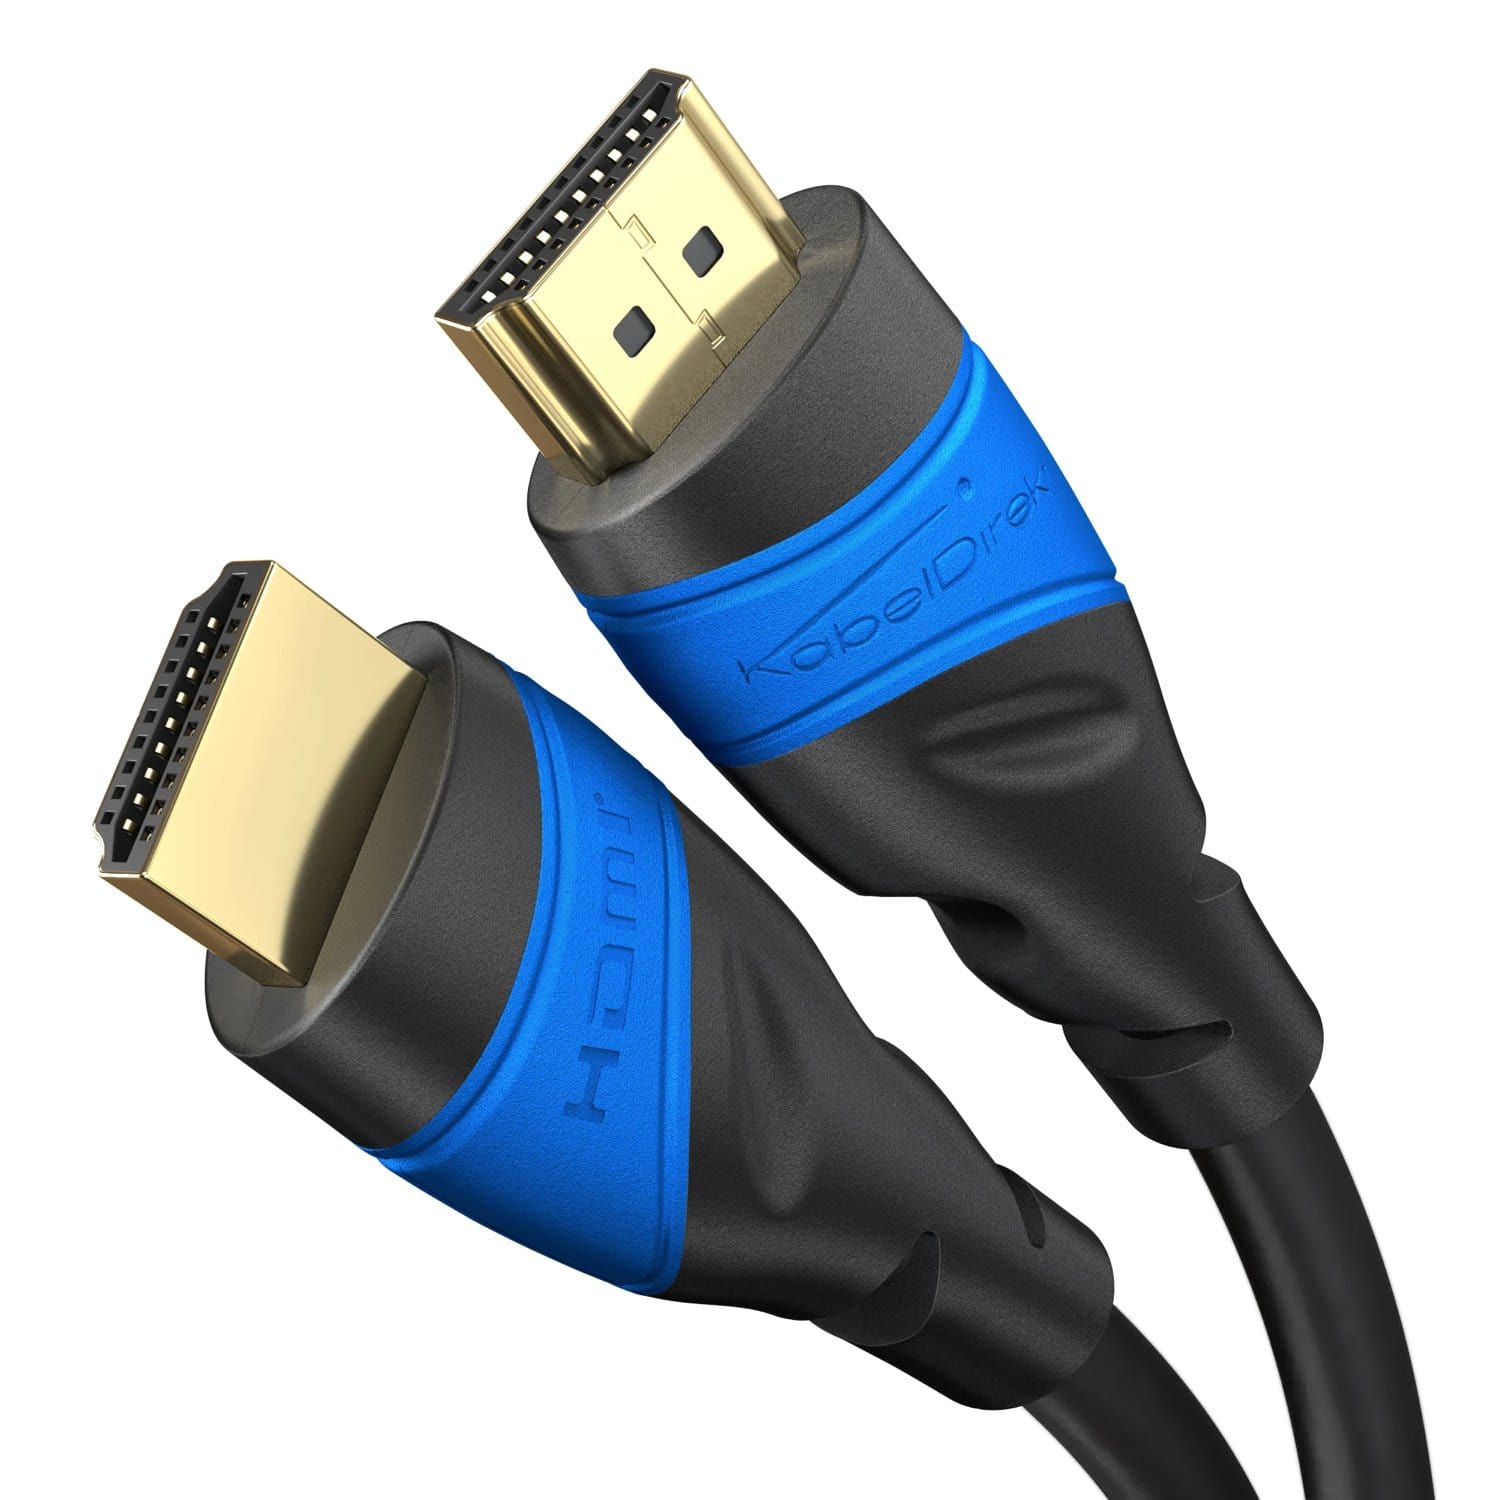 Types Of Hdmi Cableshigh-speed Mini Hdmi Cable 4k 3d 1080p